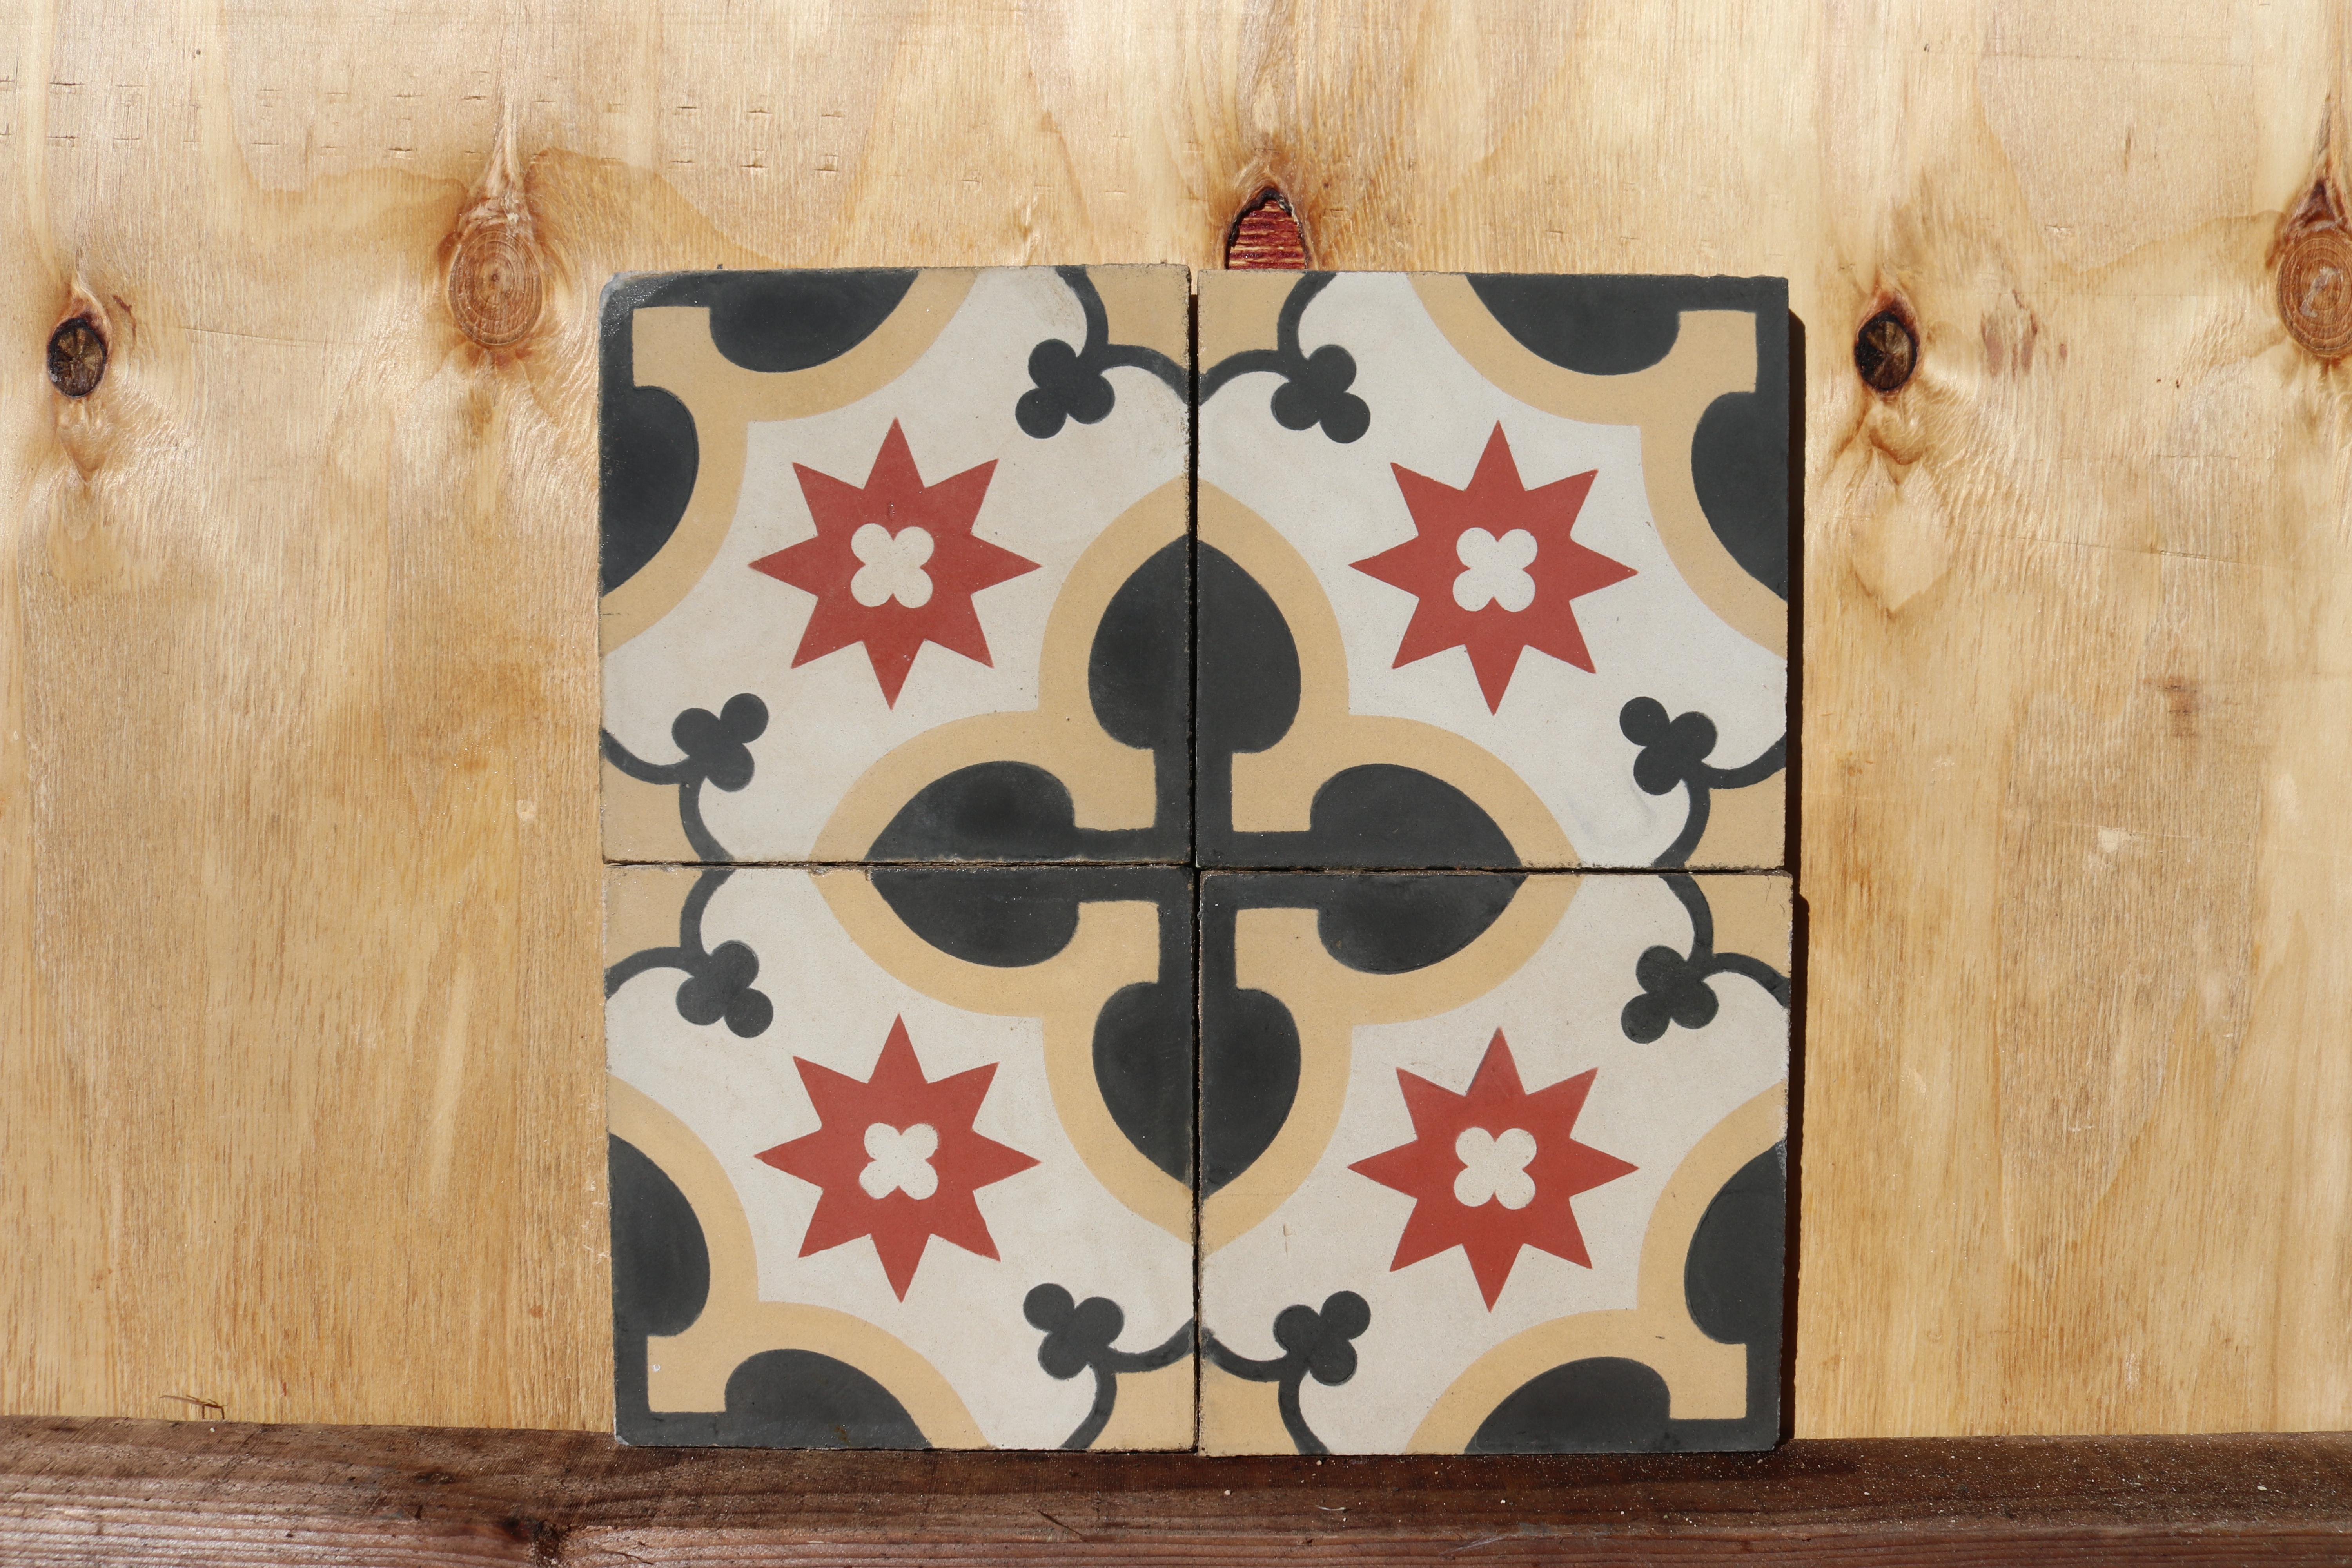 A set of 20 reclaimed / unused encaustic tiles, perfect for a splash-back or hall way. These tiles will cover 0.8 m2 or 8.6 sq ft.